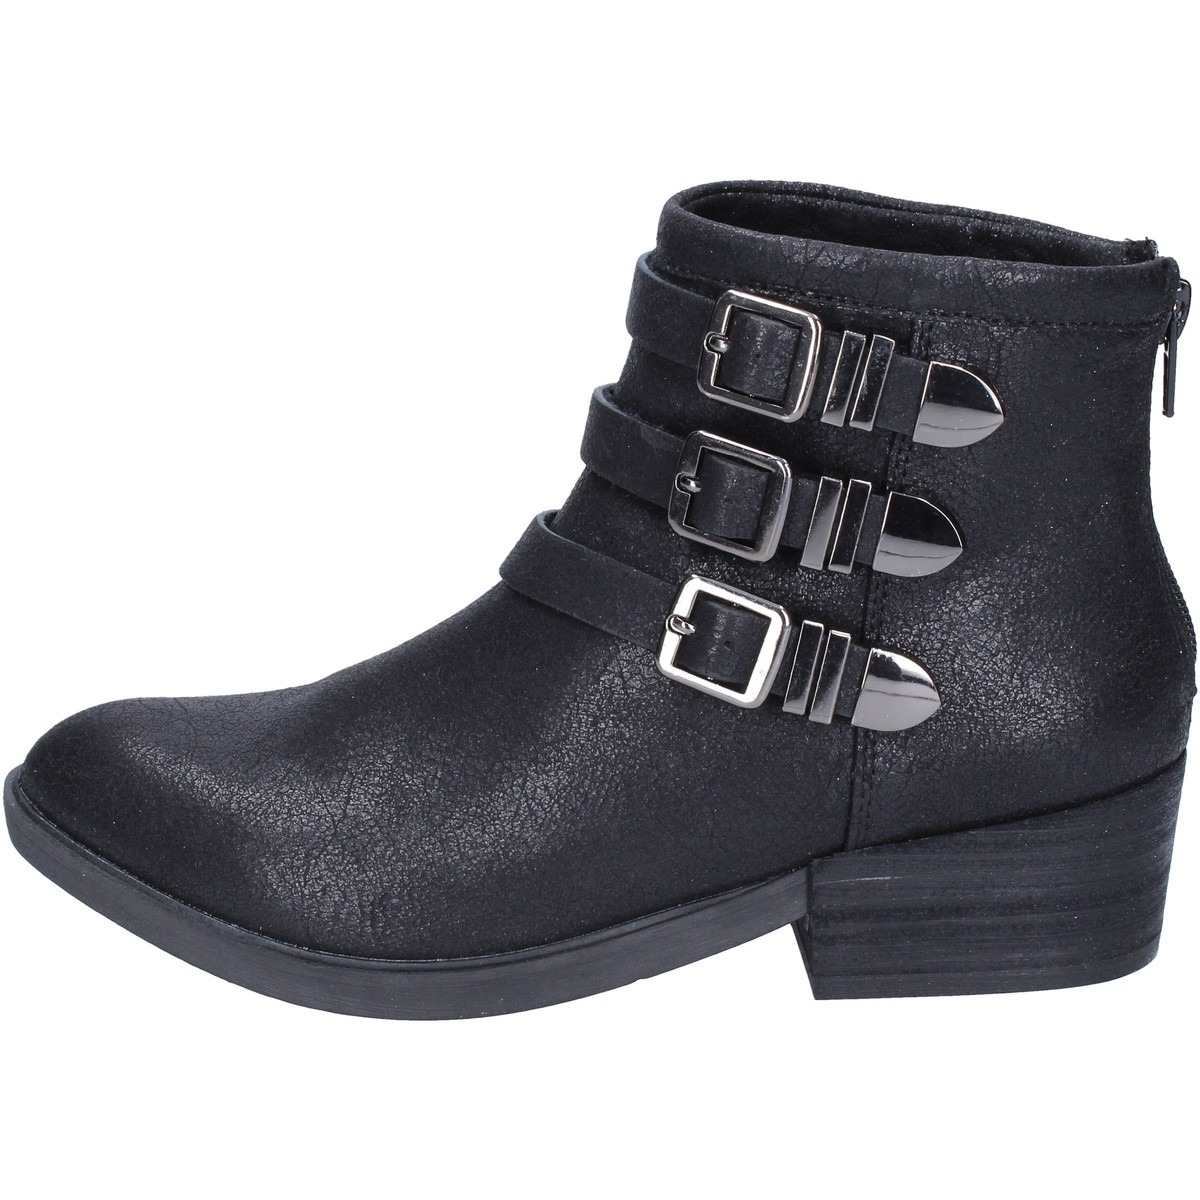 Spartoo - Ankle Boots Black for Women from Francescomilano GOOFASH